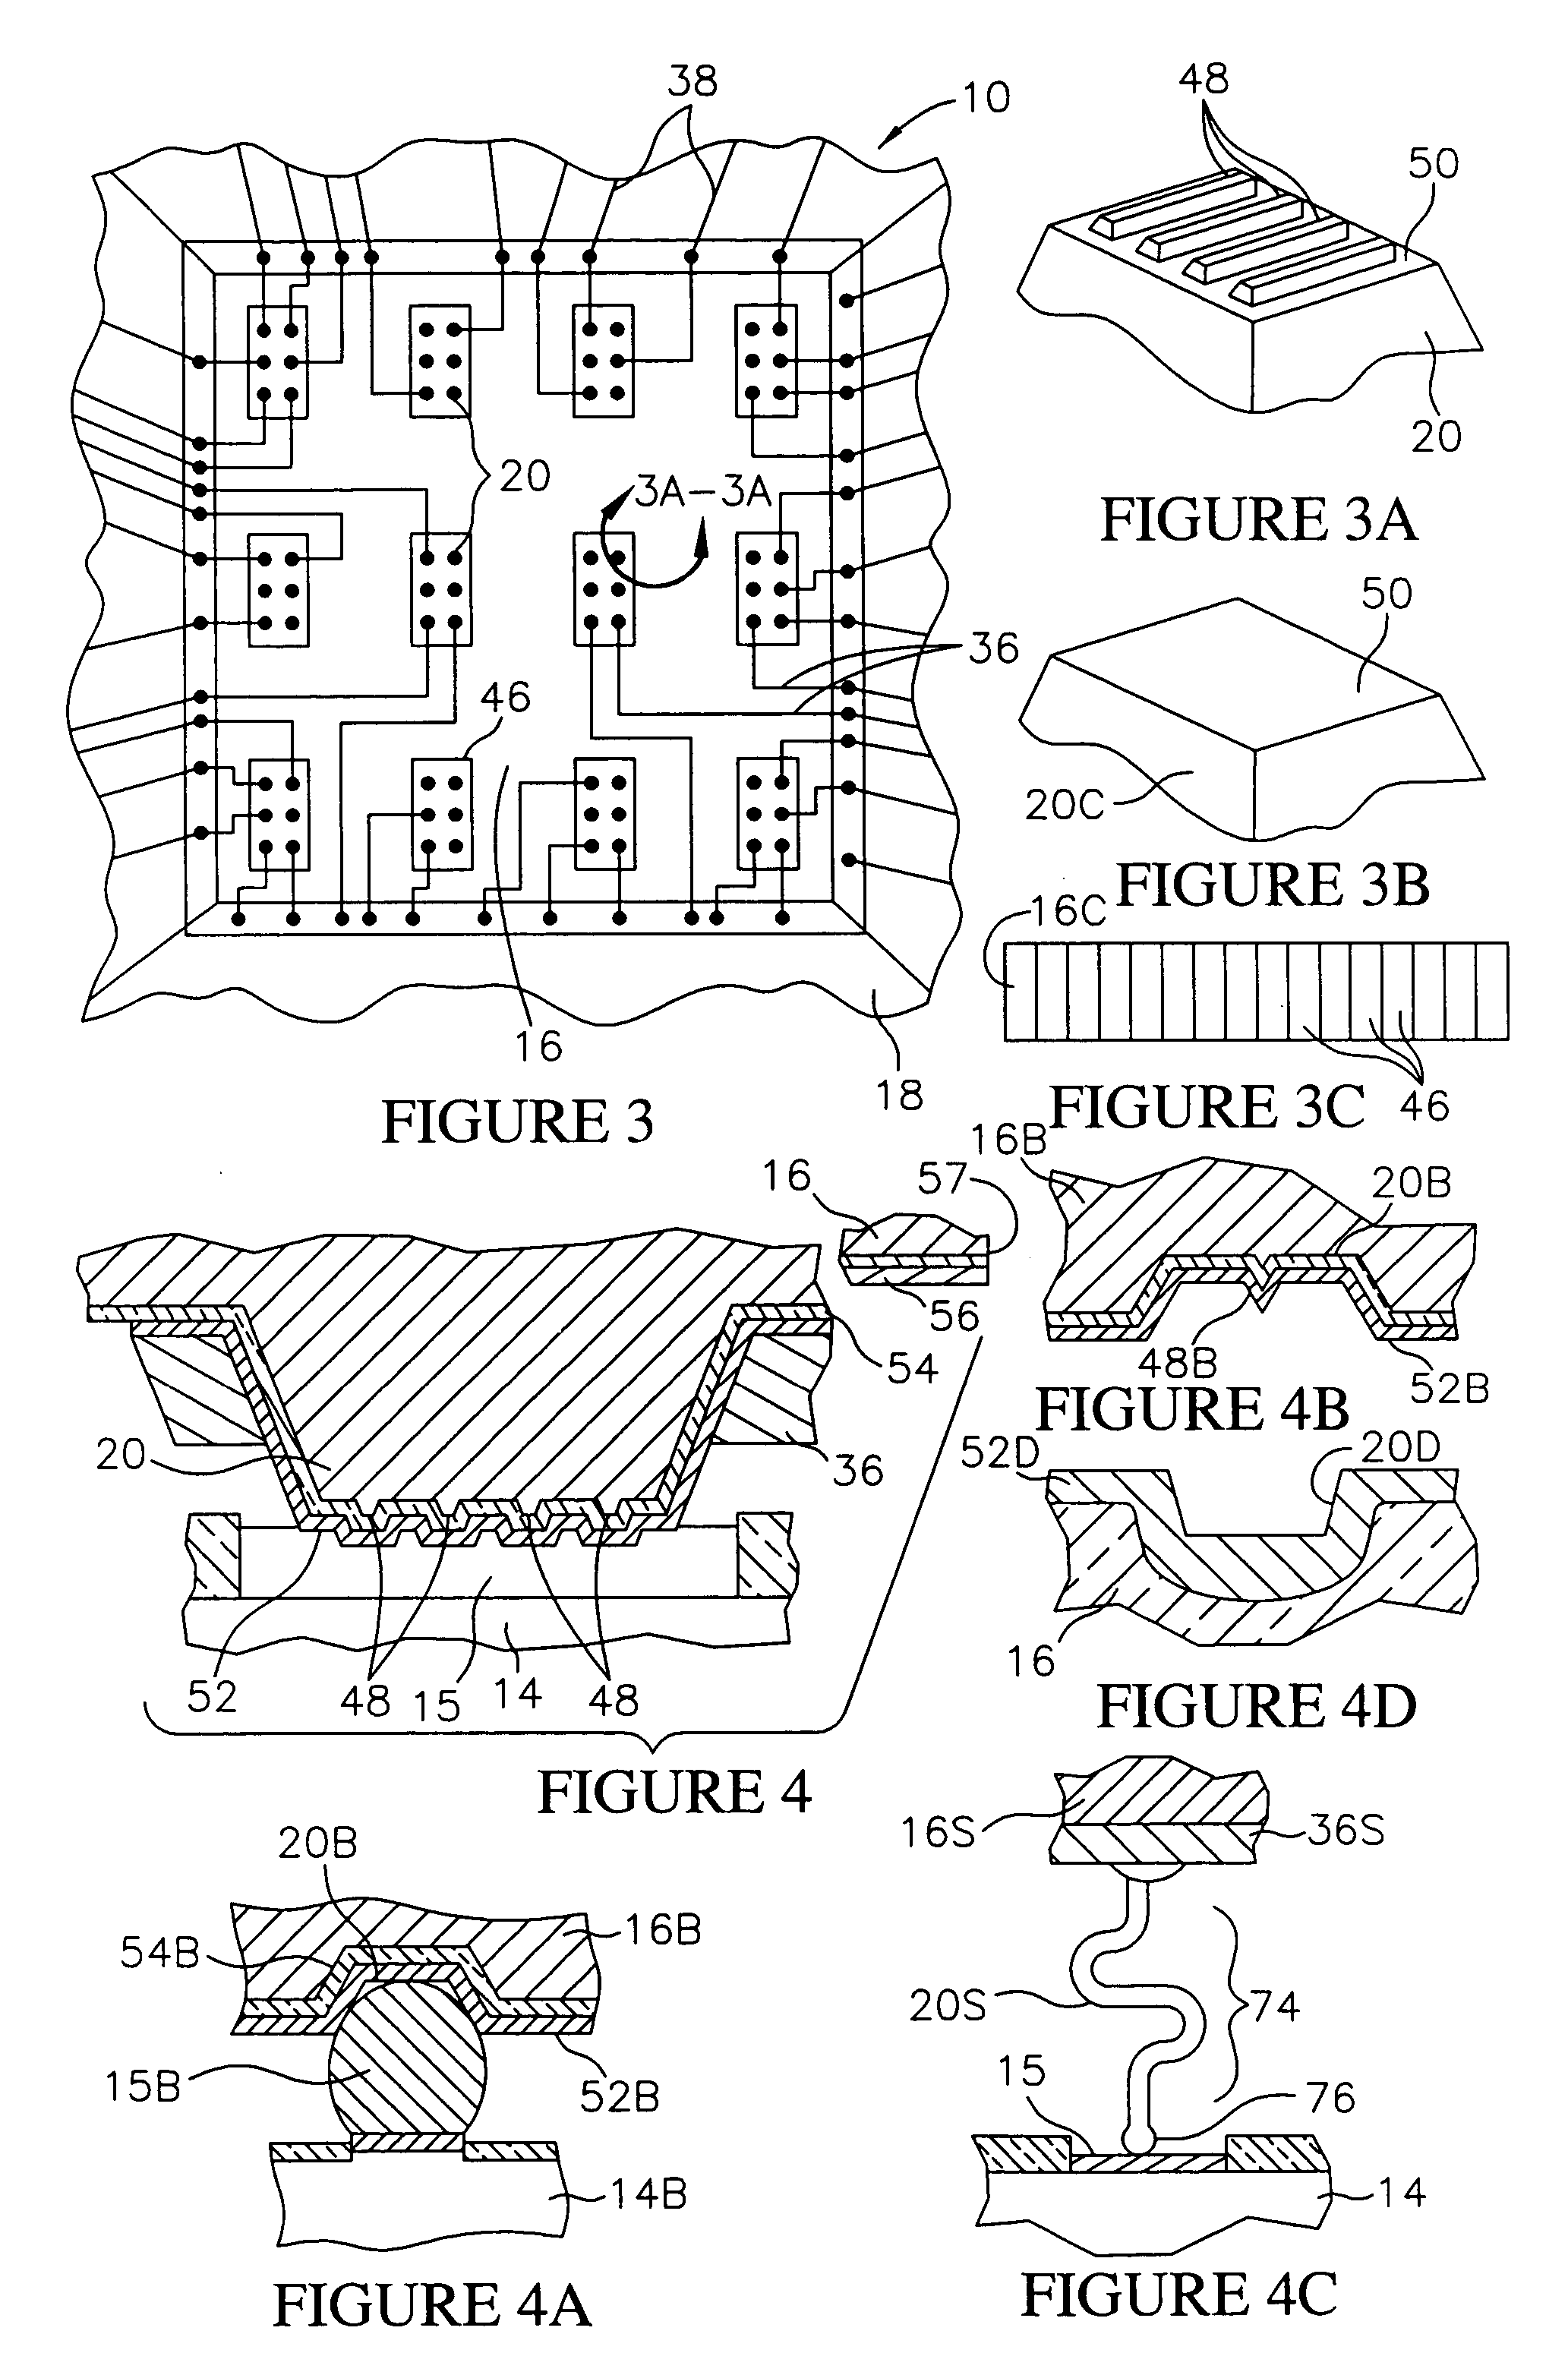 Probe card for semiconductor wafers having mounting plate and socket